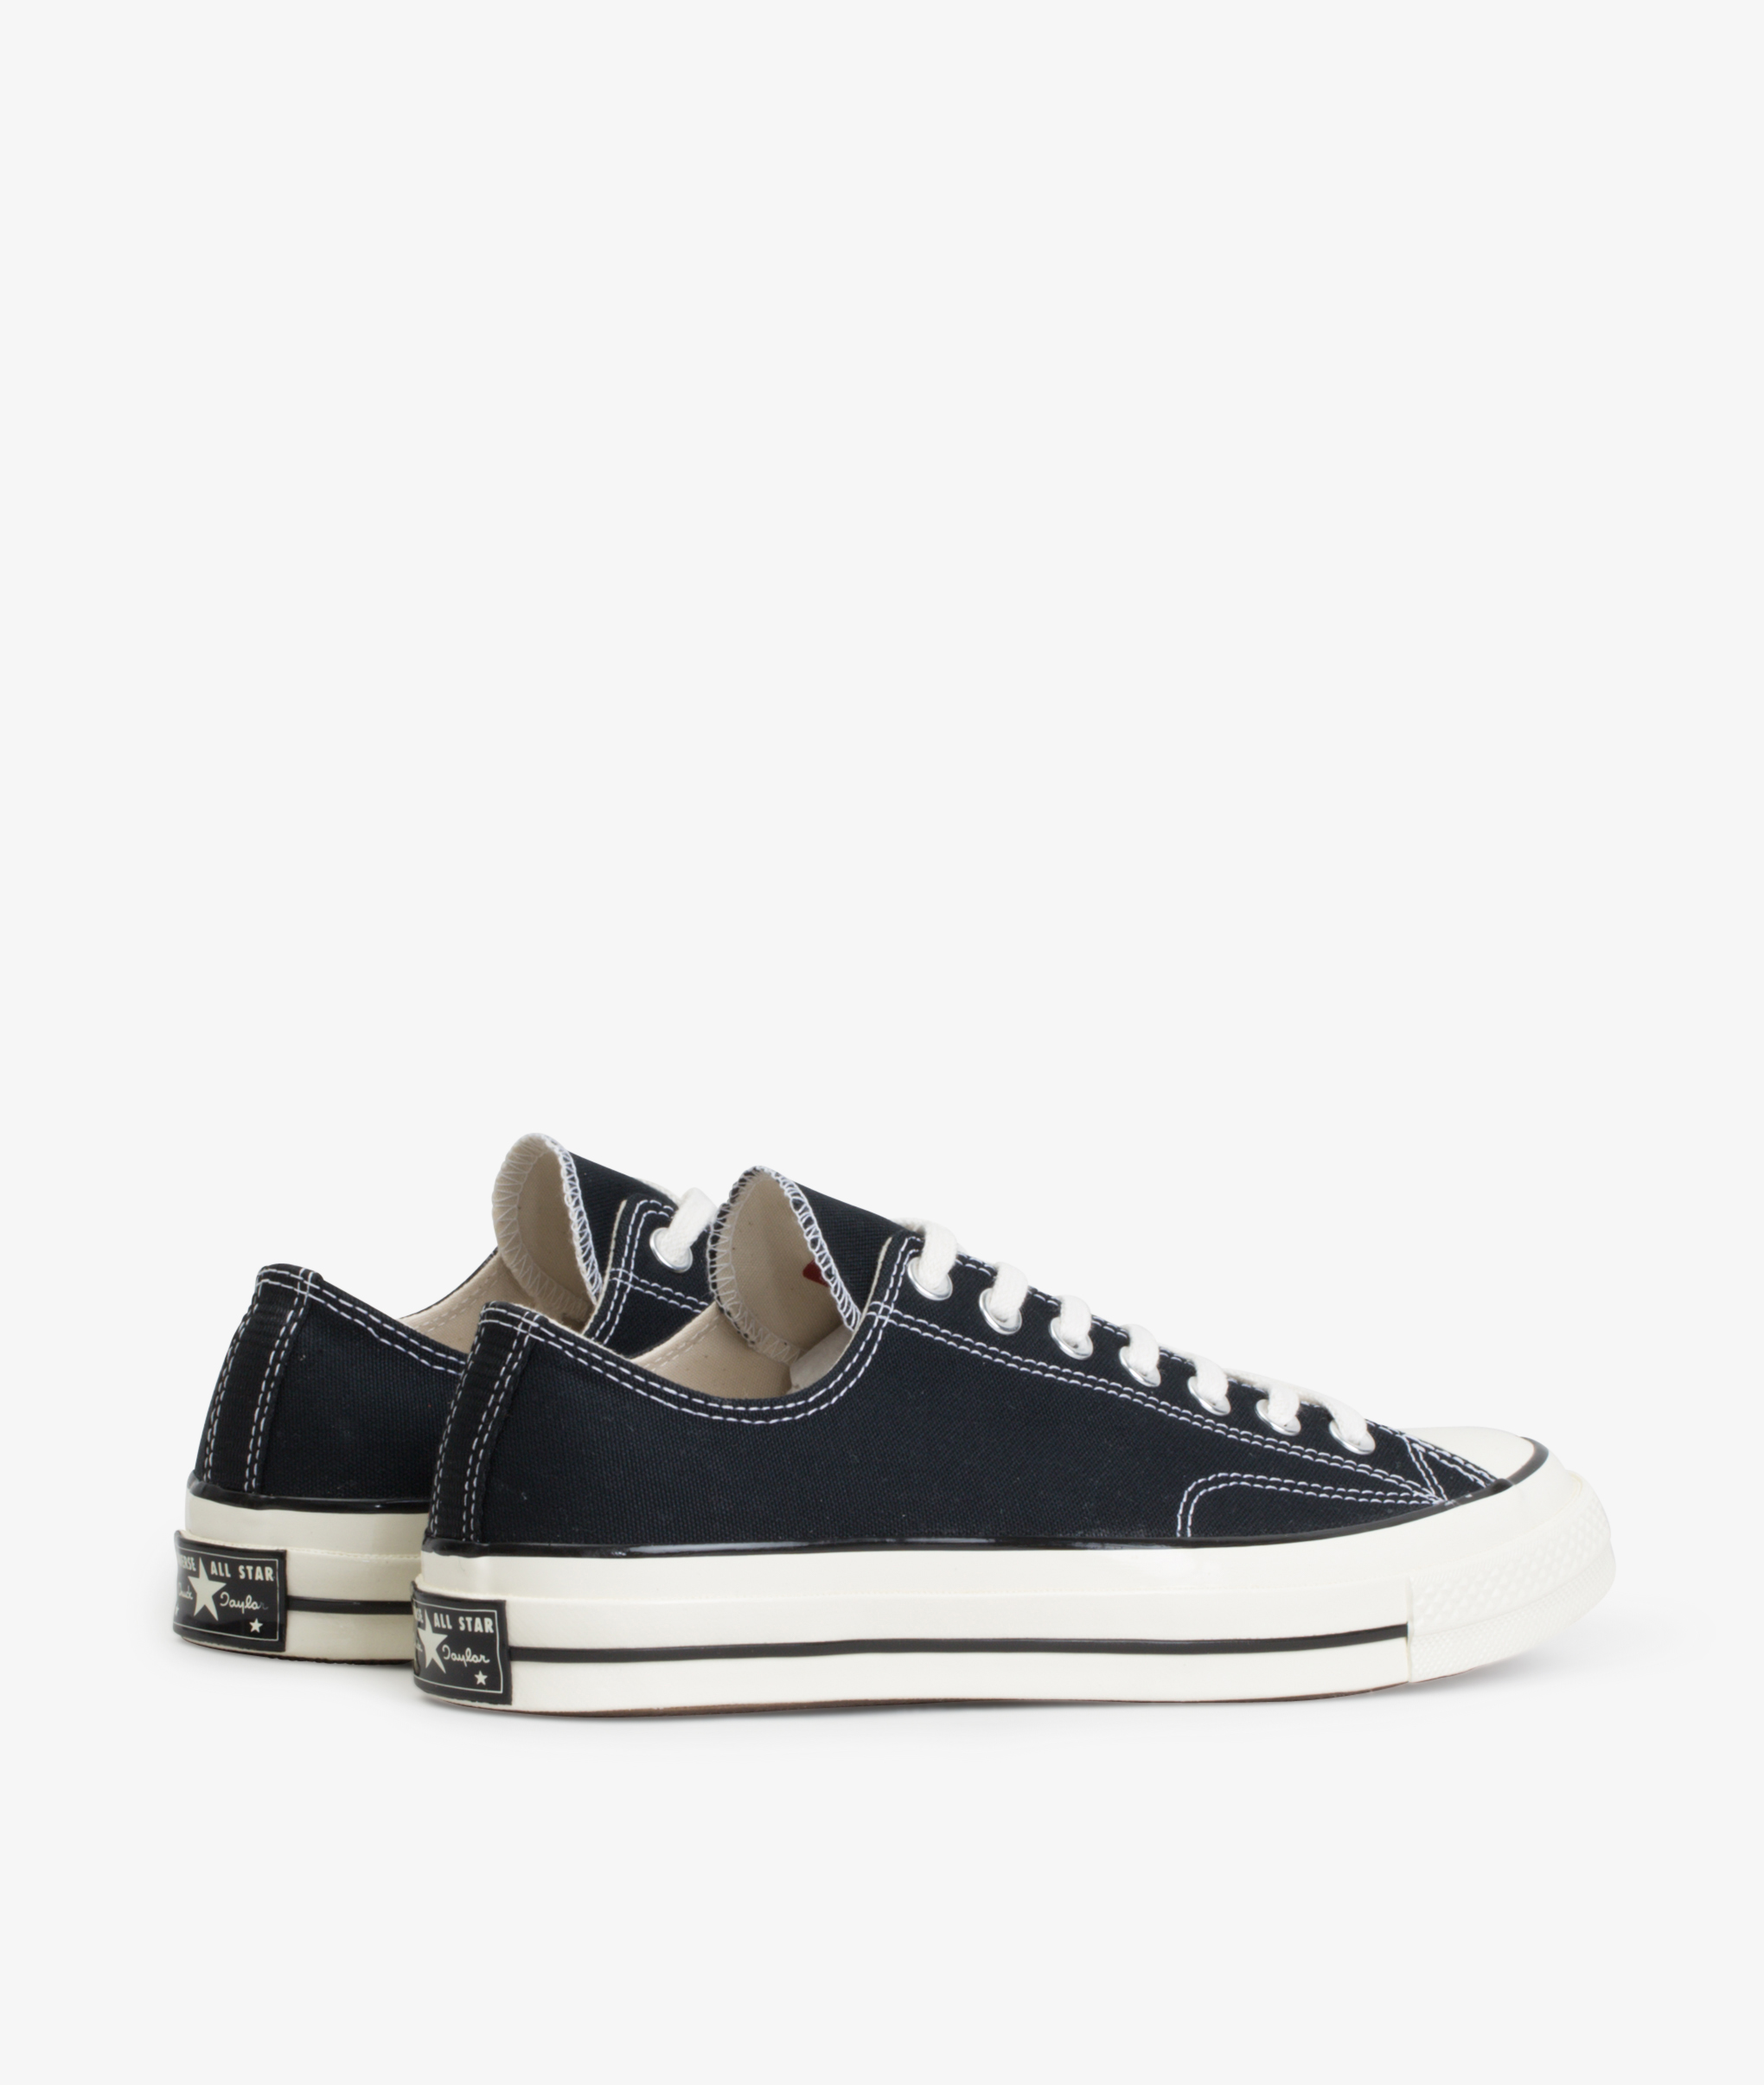 Norse Store | Shipping Worldwide - Converse All Star 70 OX